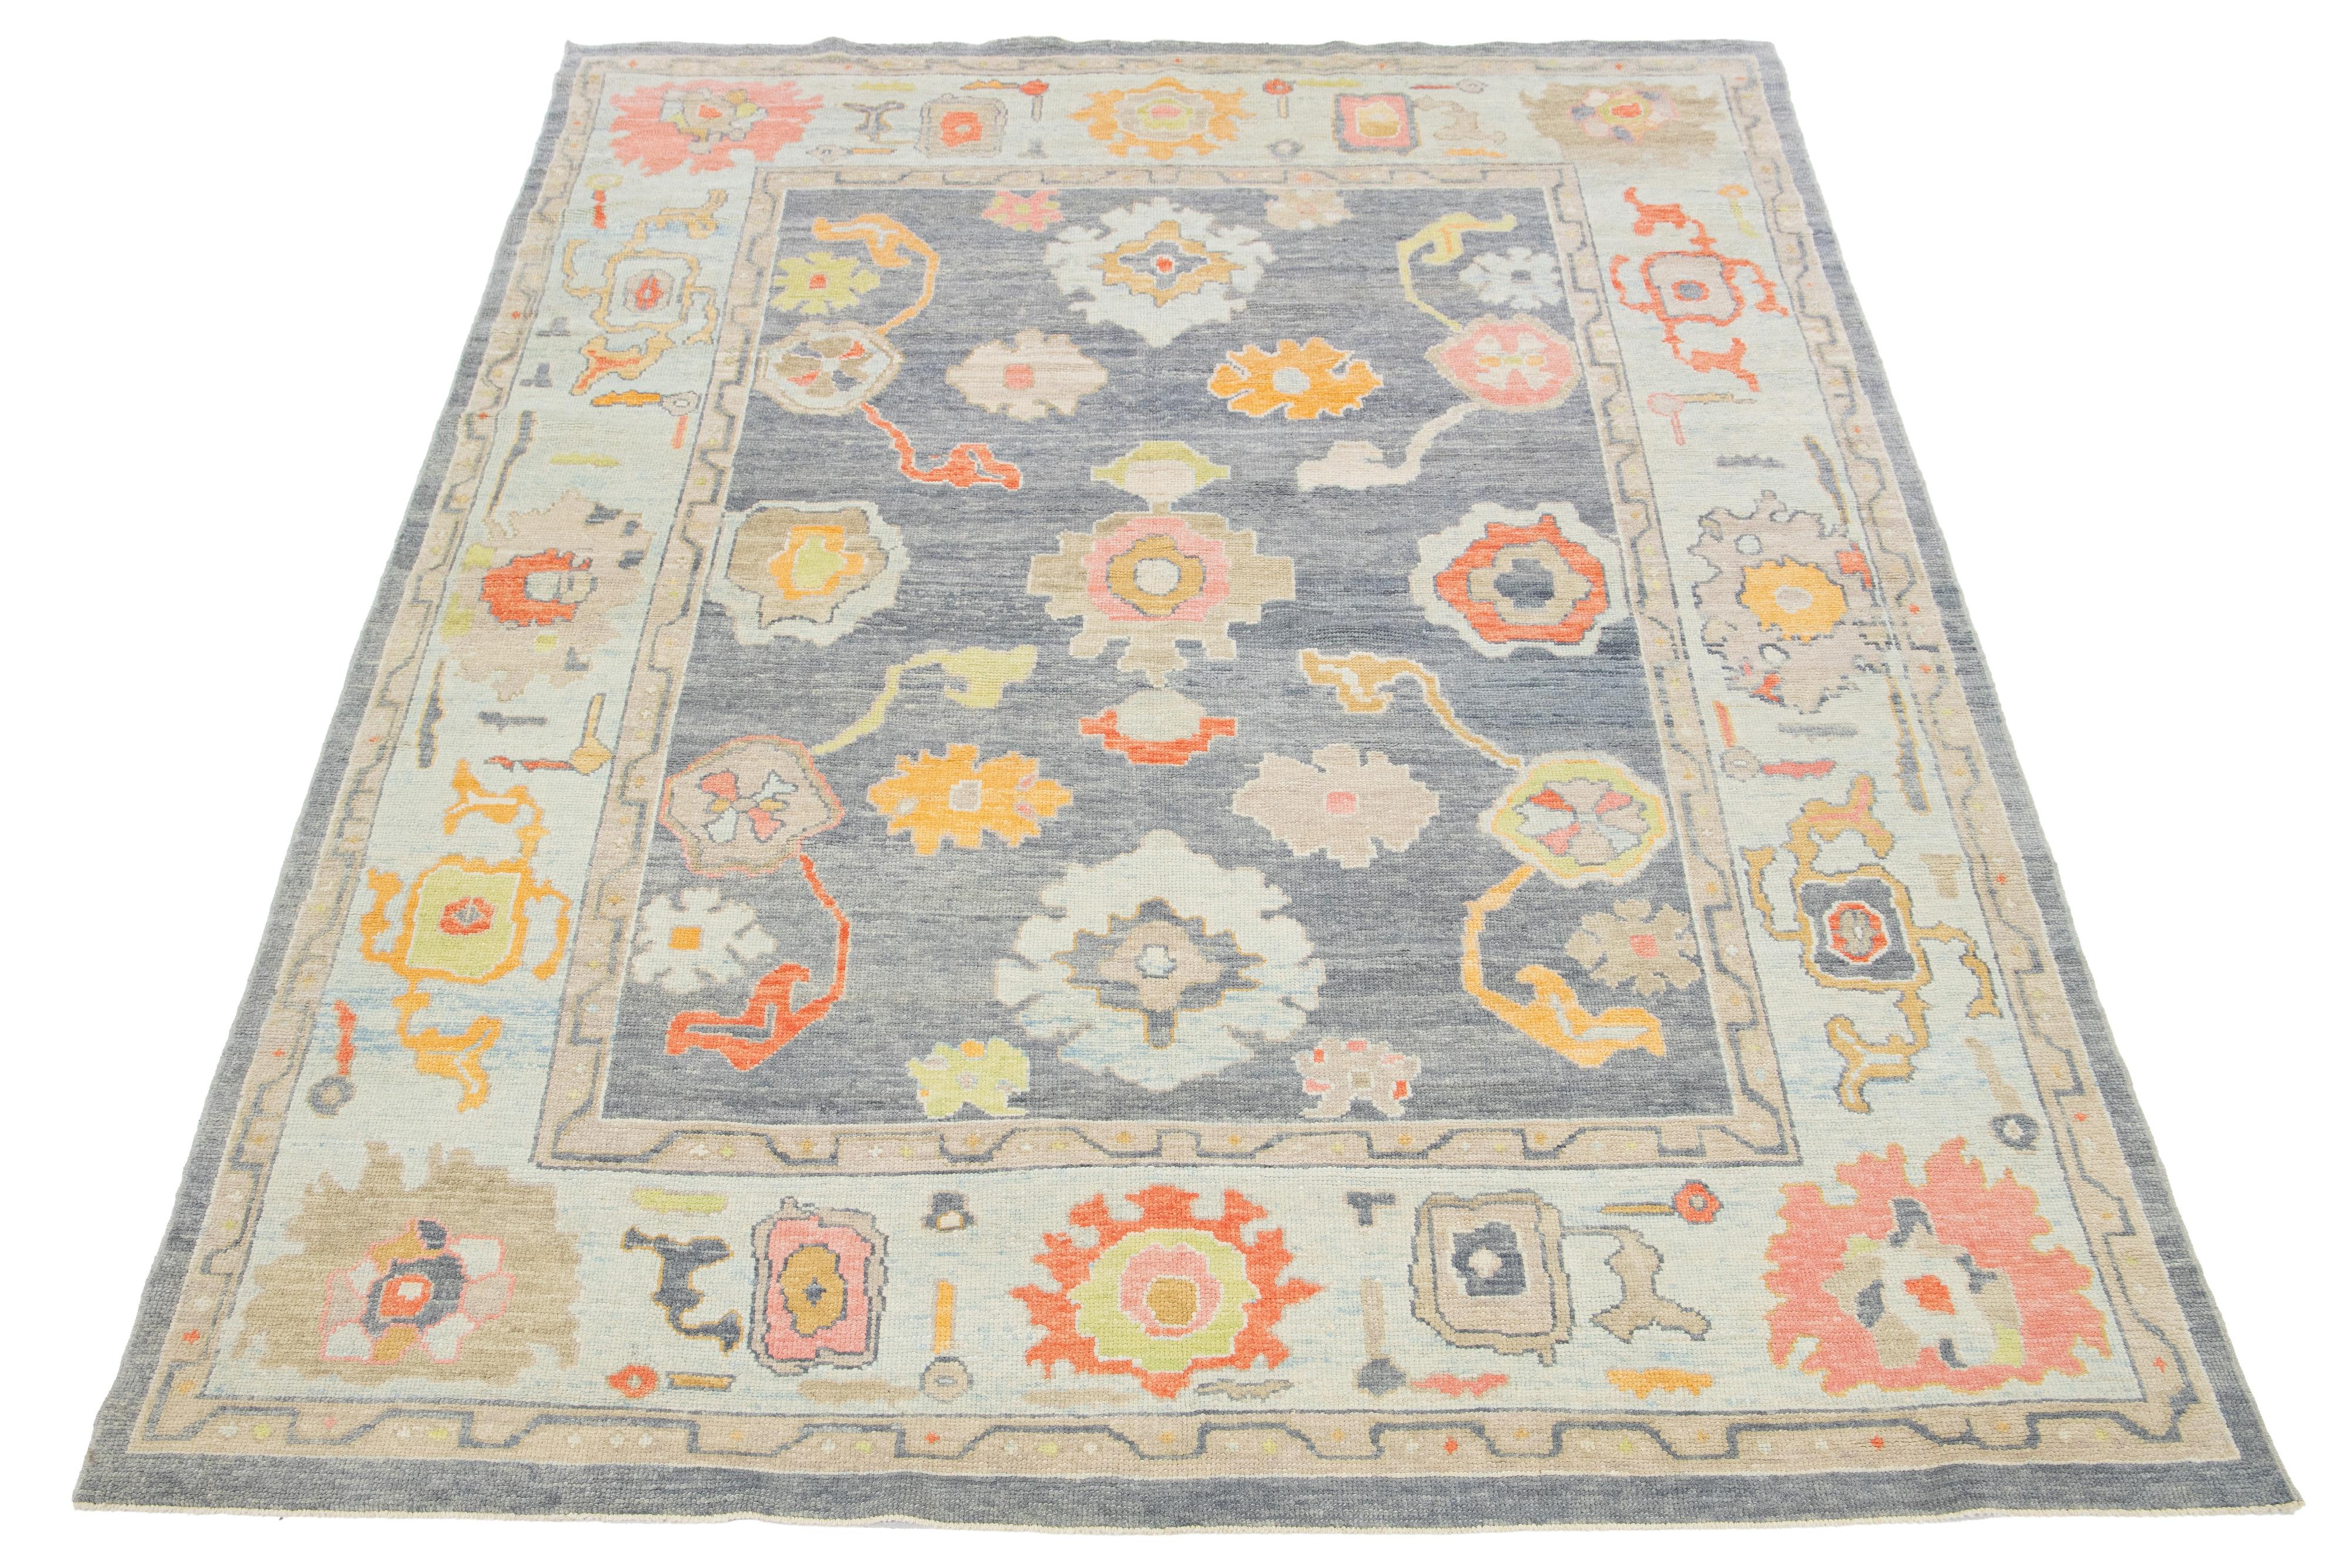 This hand-knotted wool rug is a modern Turkish piece featuring a gray field with a light blue frame and a captivating allover design of multicolor floral patterns.

This rug measures 8'9